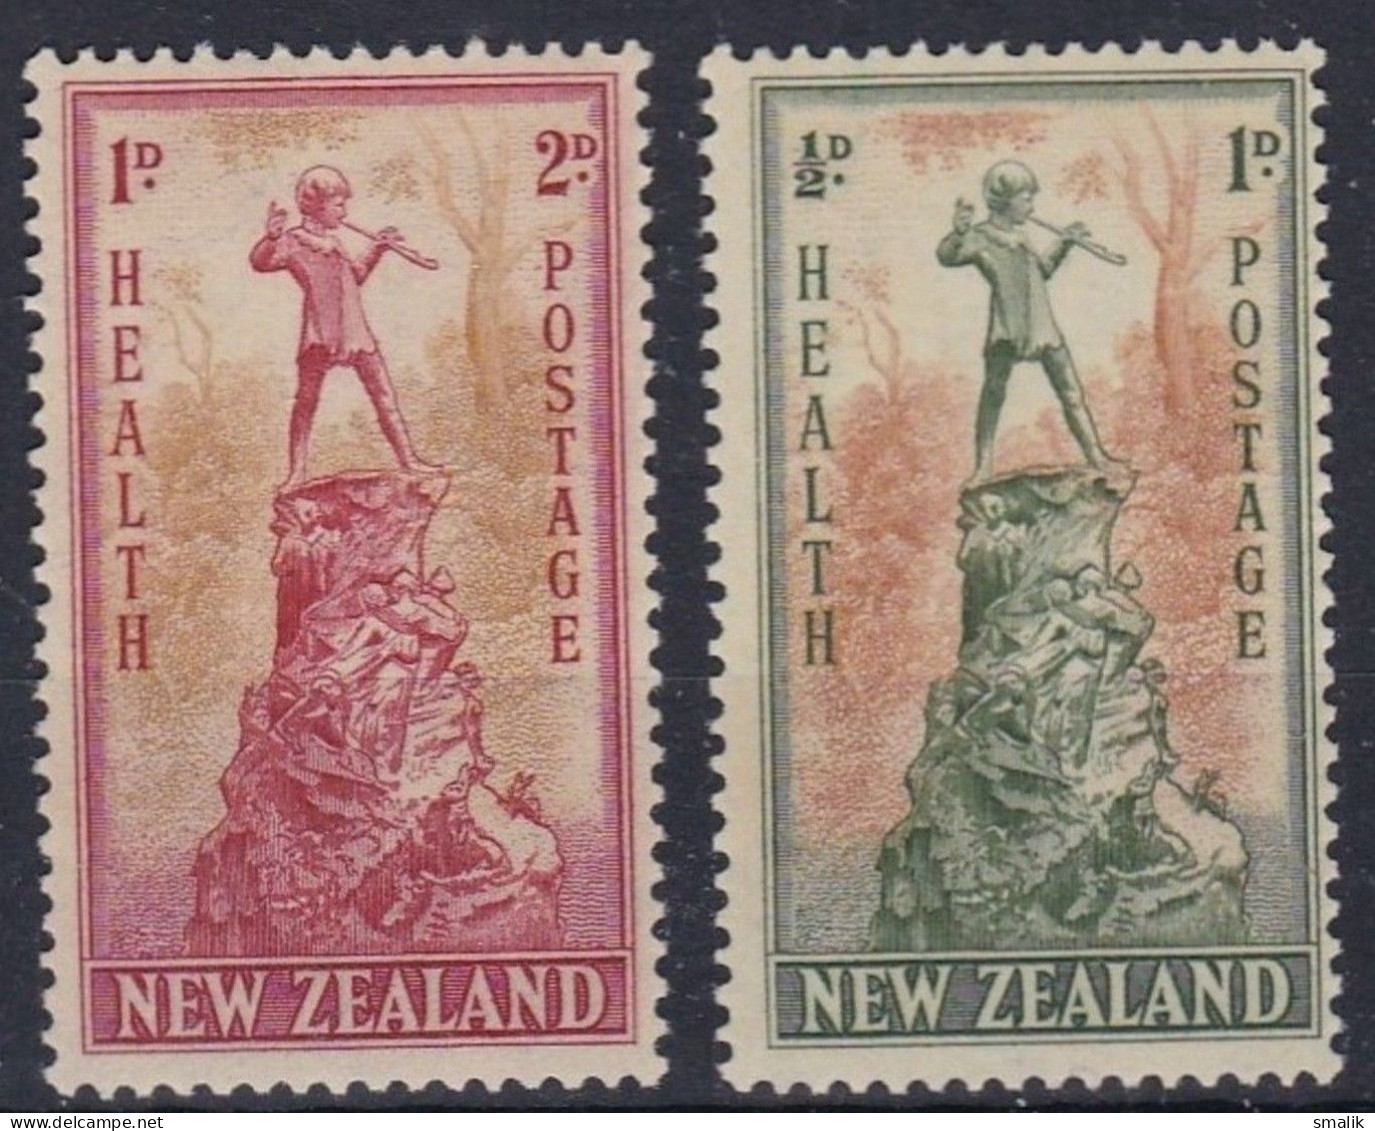 NEW ZEALAND 1945 - Health Surcharge, Peter Pan, Complete Set Of 2v. MNH - Nuovi